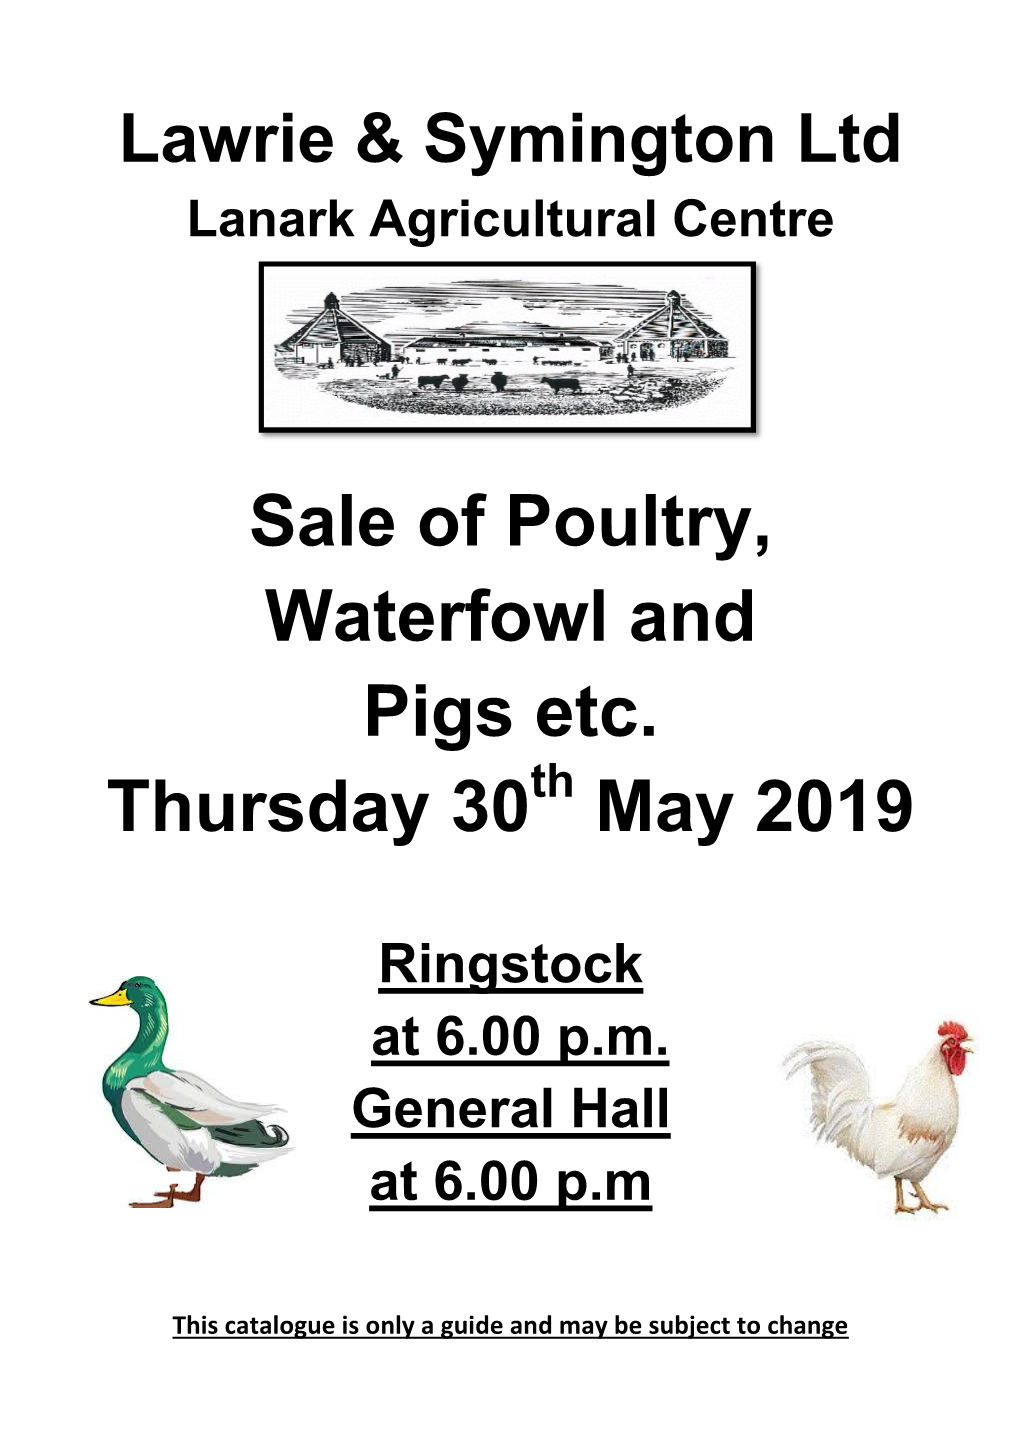 Sale of Poultry, Waterfowl and Pigs Etc. Thursday 30 May 2019